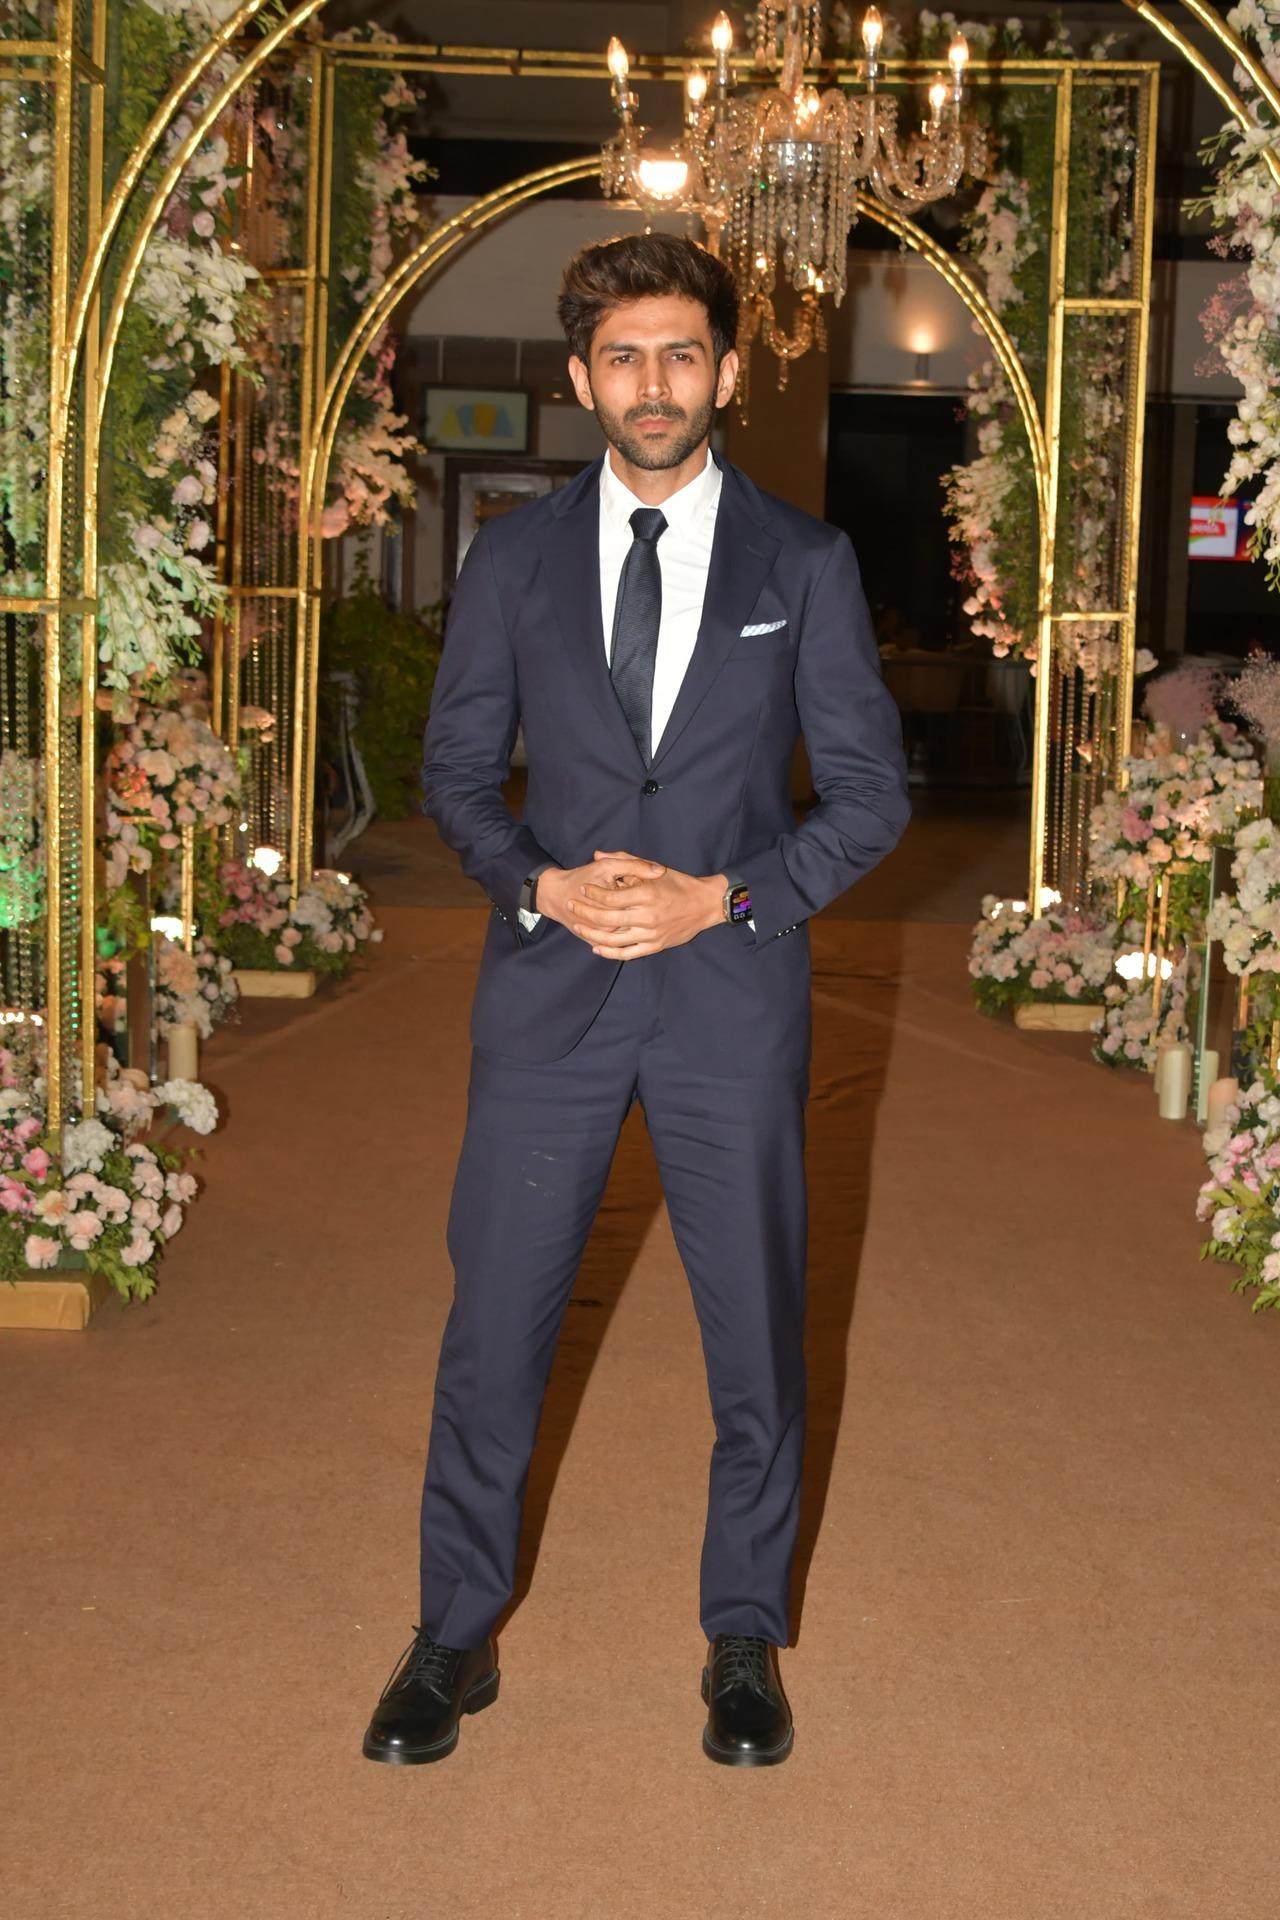 Kartik Aaryan attended friend Sunny Singh's sister's reception in a stylish navy blue three-piece suit